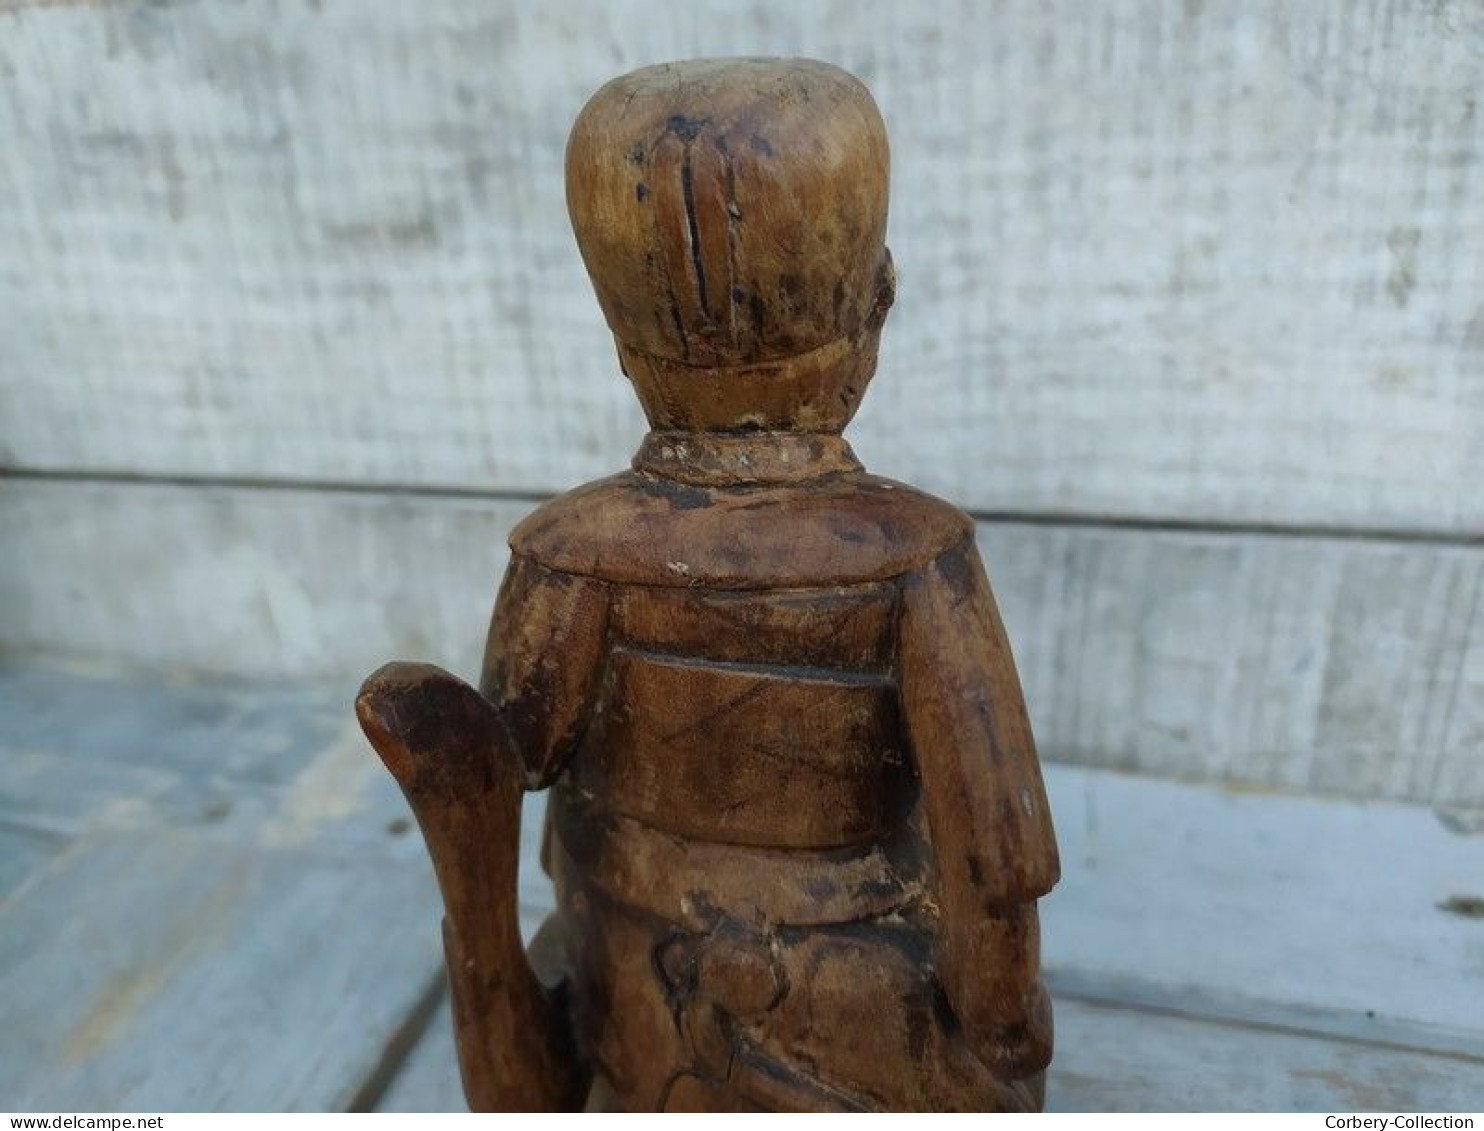 Statuette Chinois Bois Sculpté Chine XVIIIeme Chinese wood carving 18th